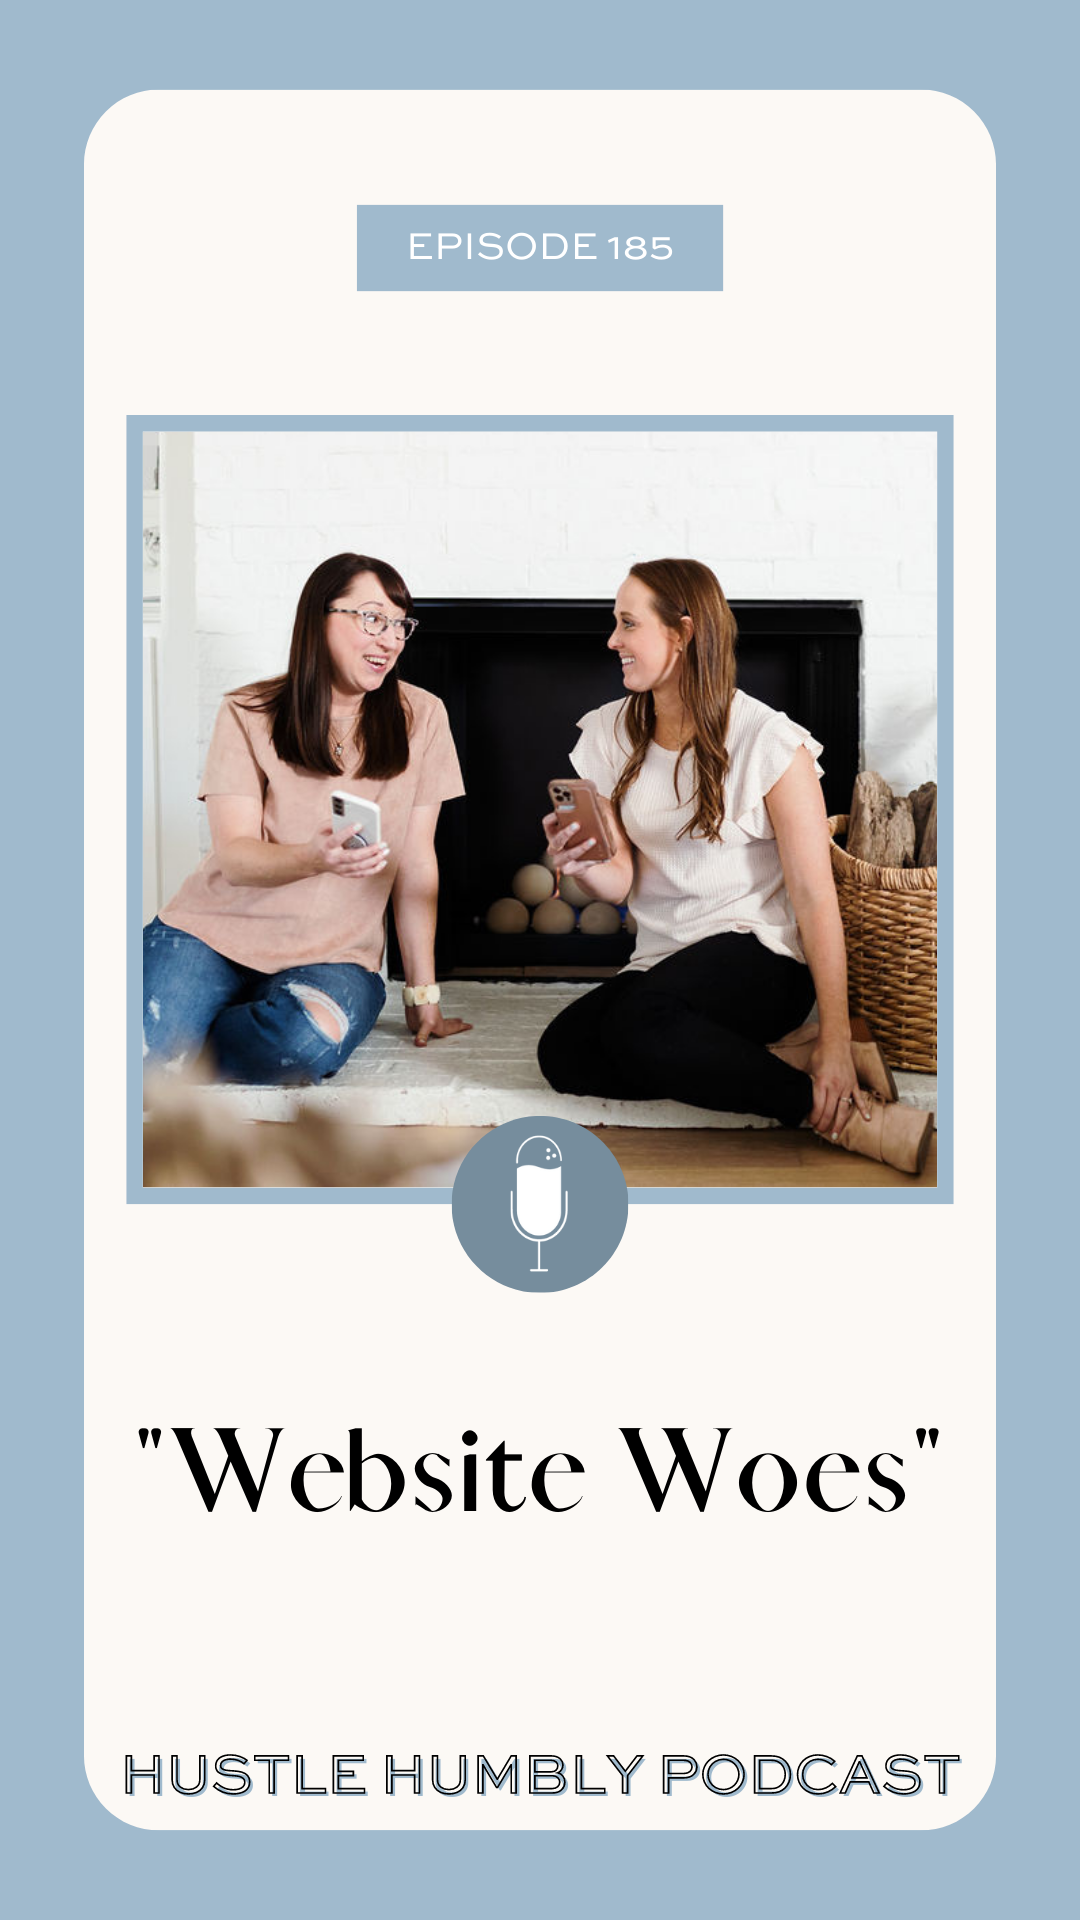 Two women discussing real estate websites